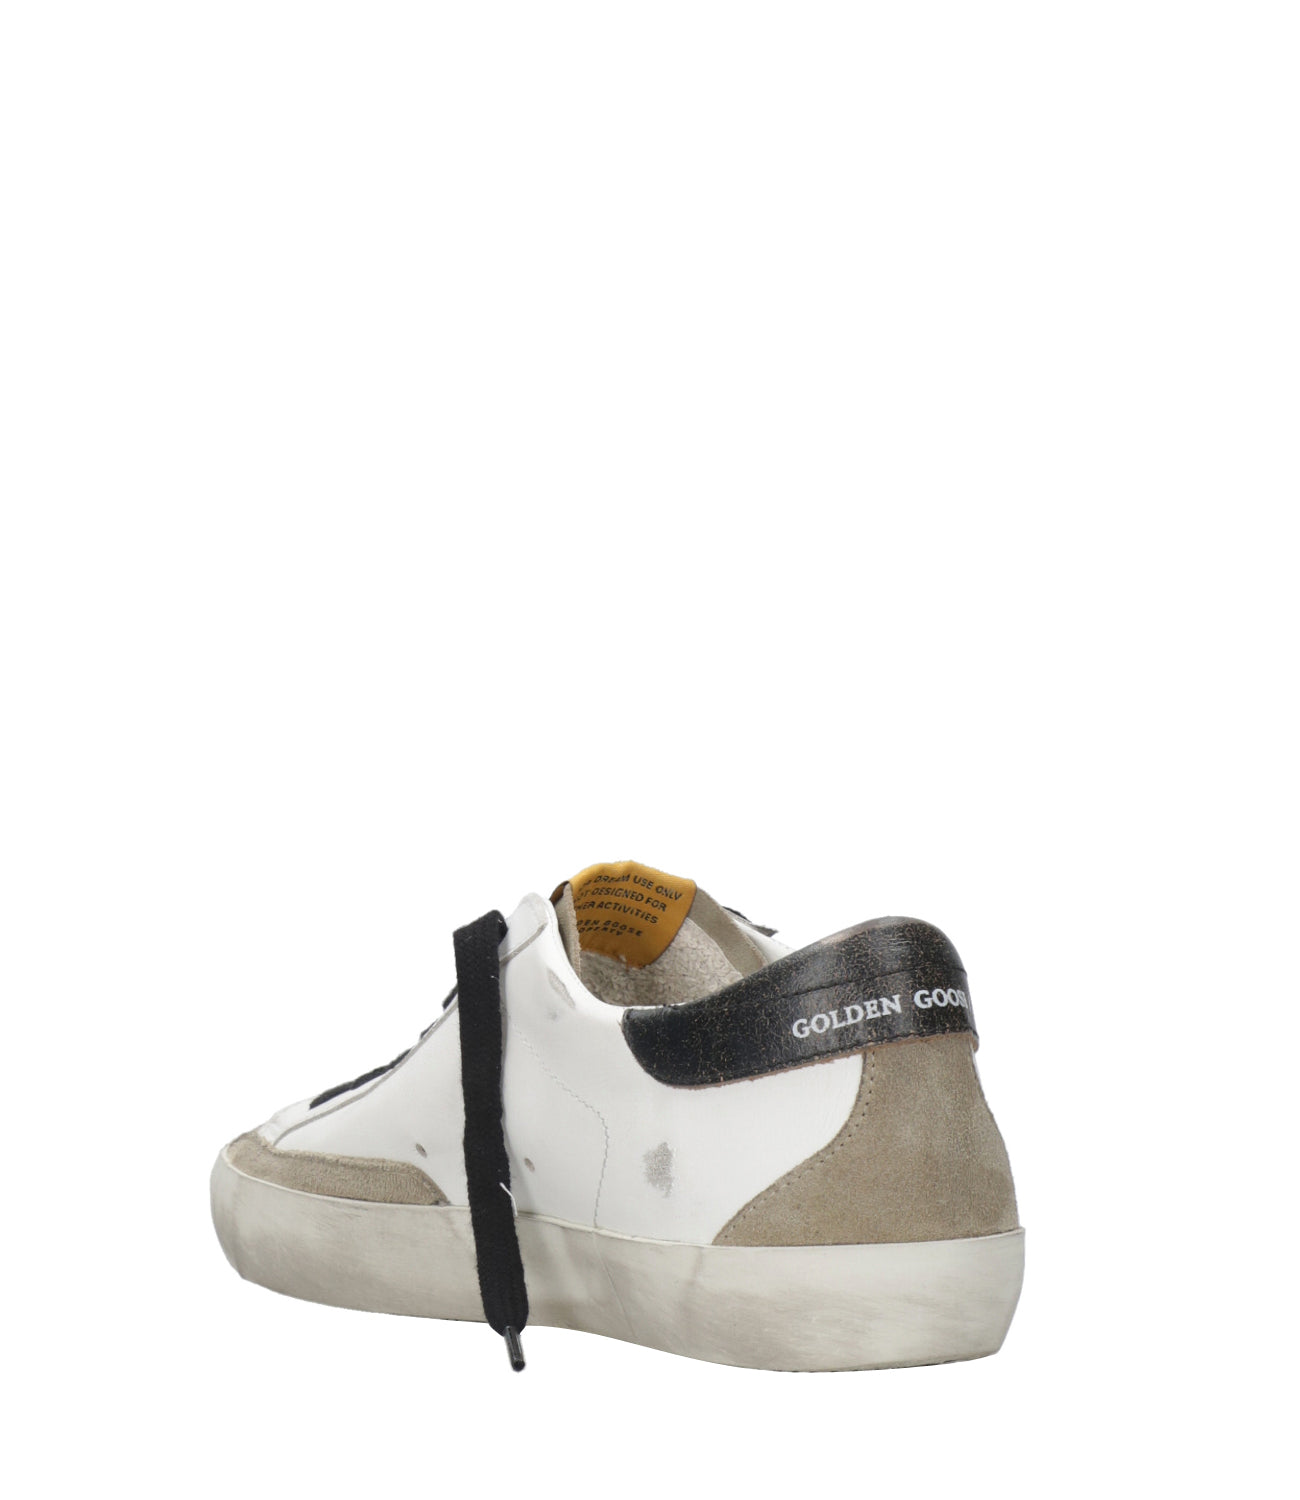 Golden Goose | Super-Star Sneakers White, Taupe and Bordeaux